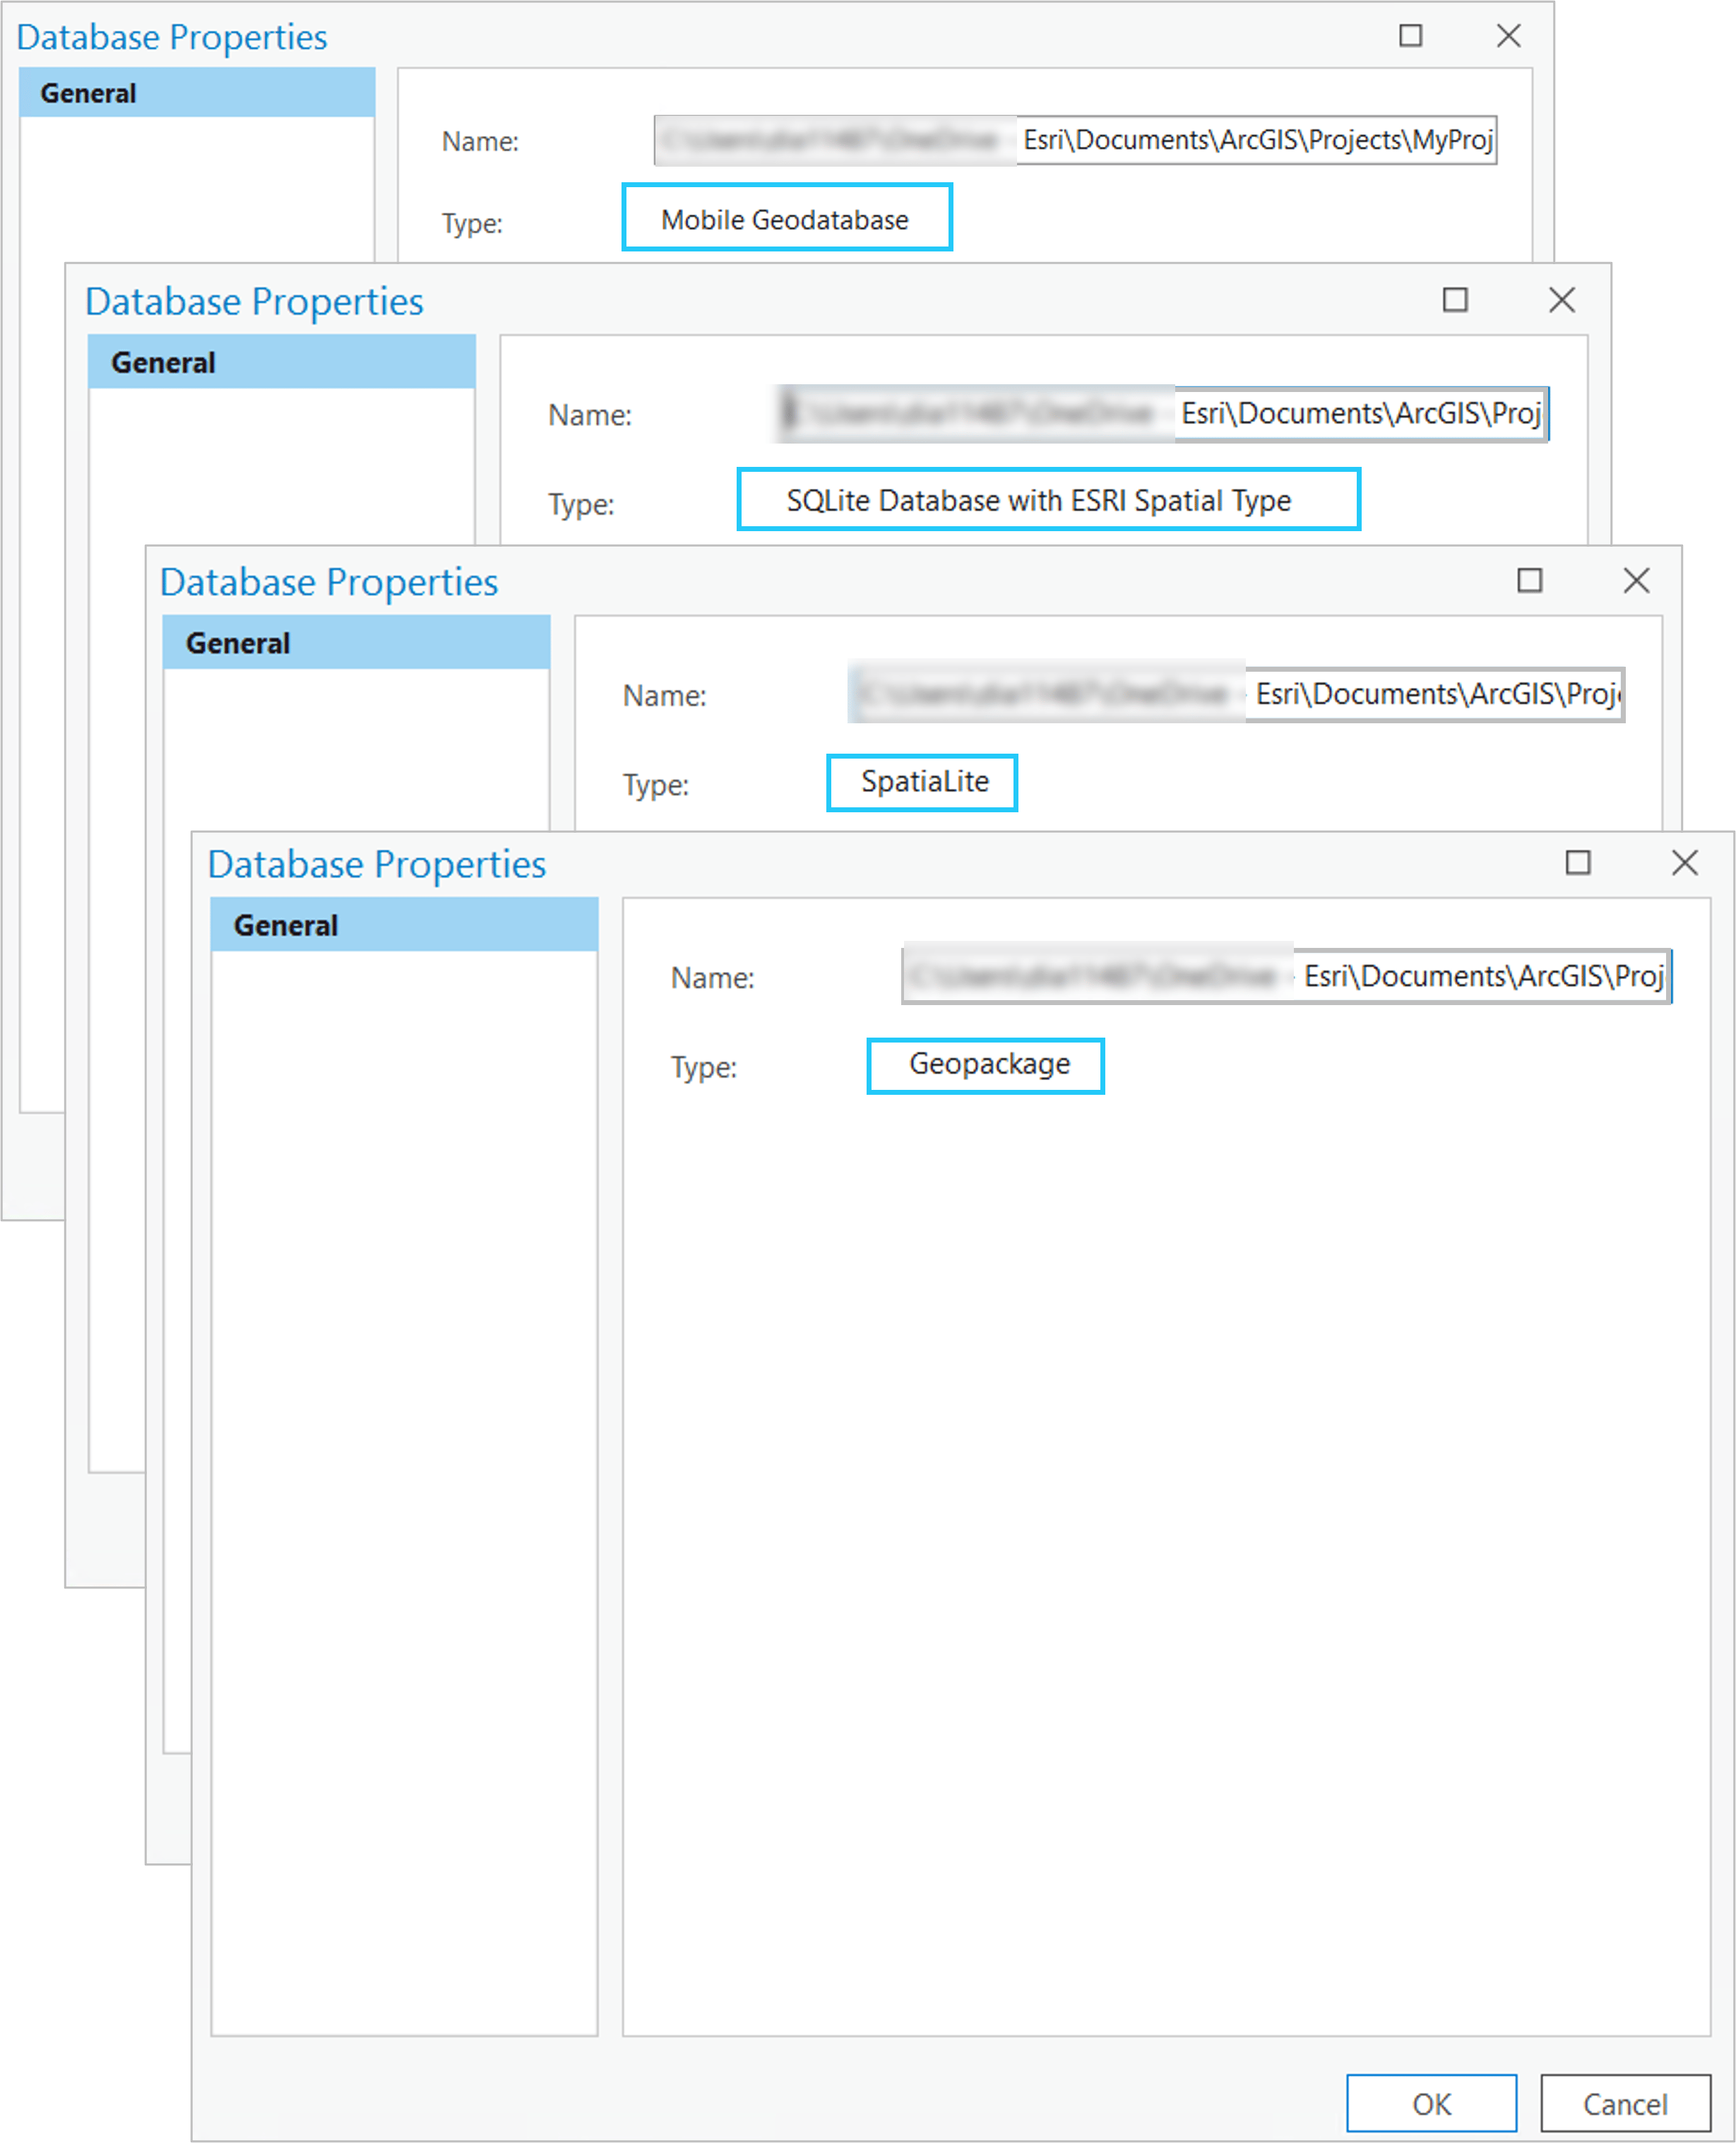 The Database Properties dialog showing different types of SQLite databases and mobile geodatabases